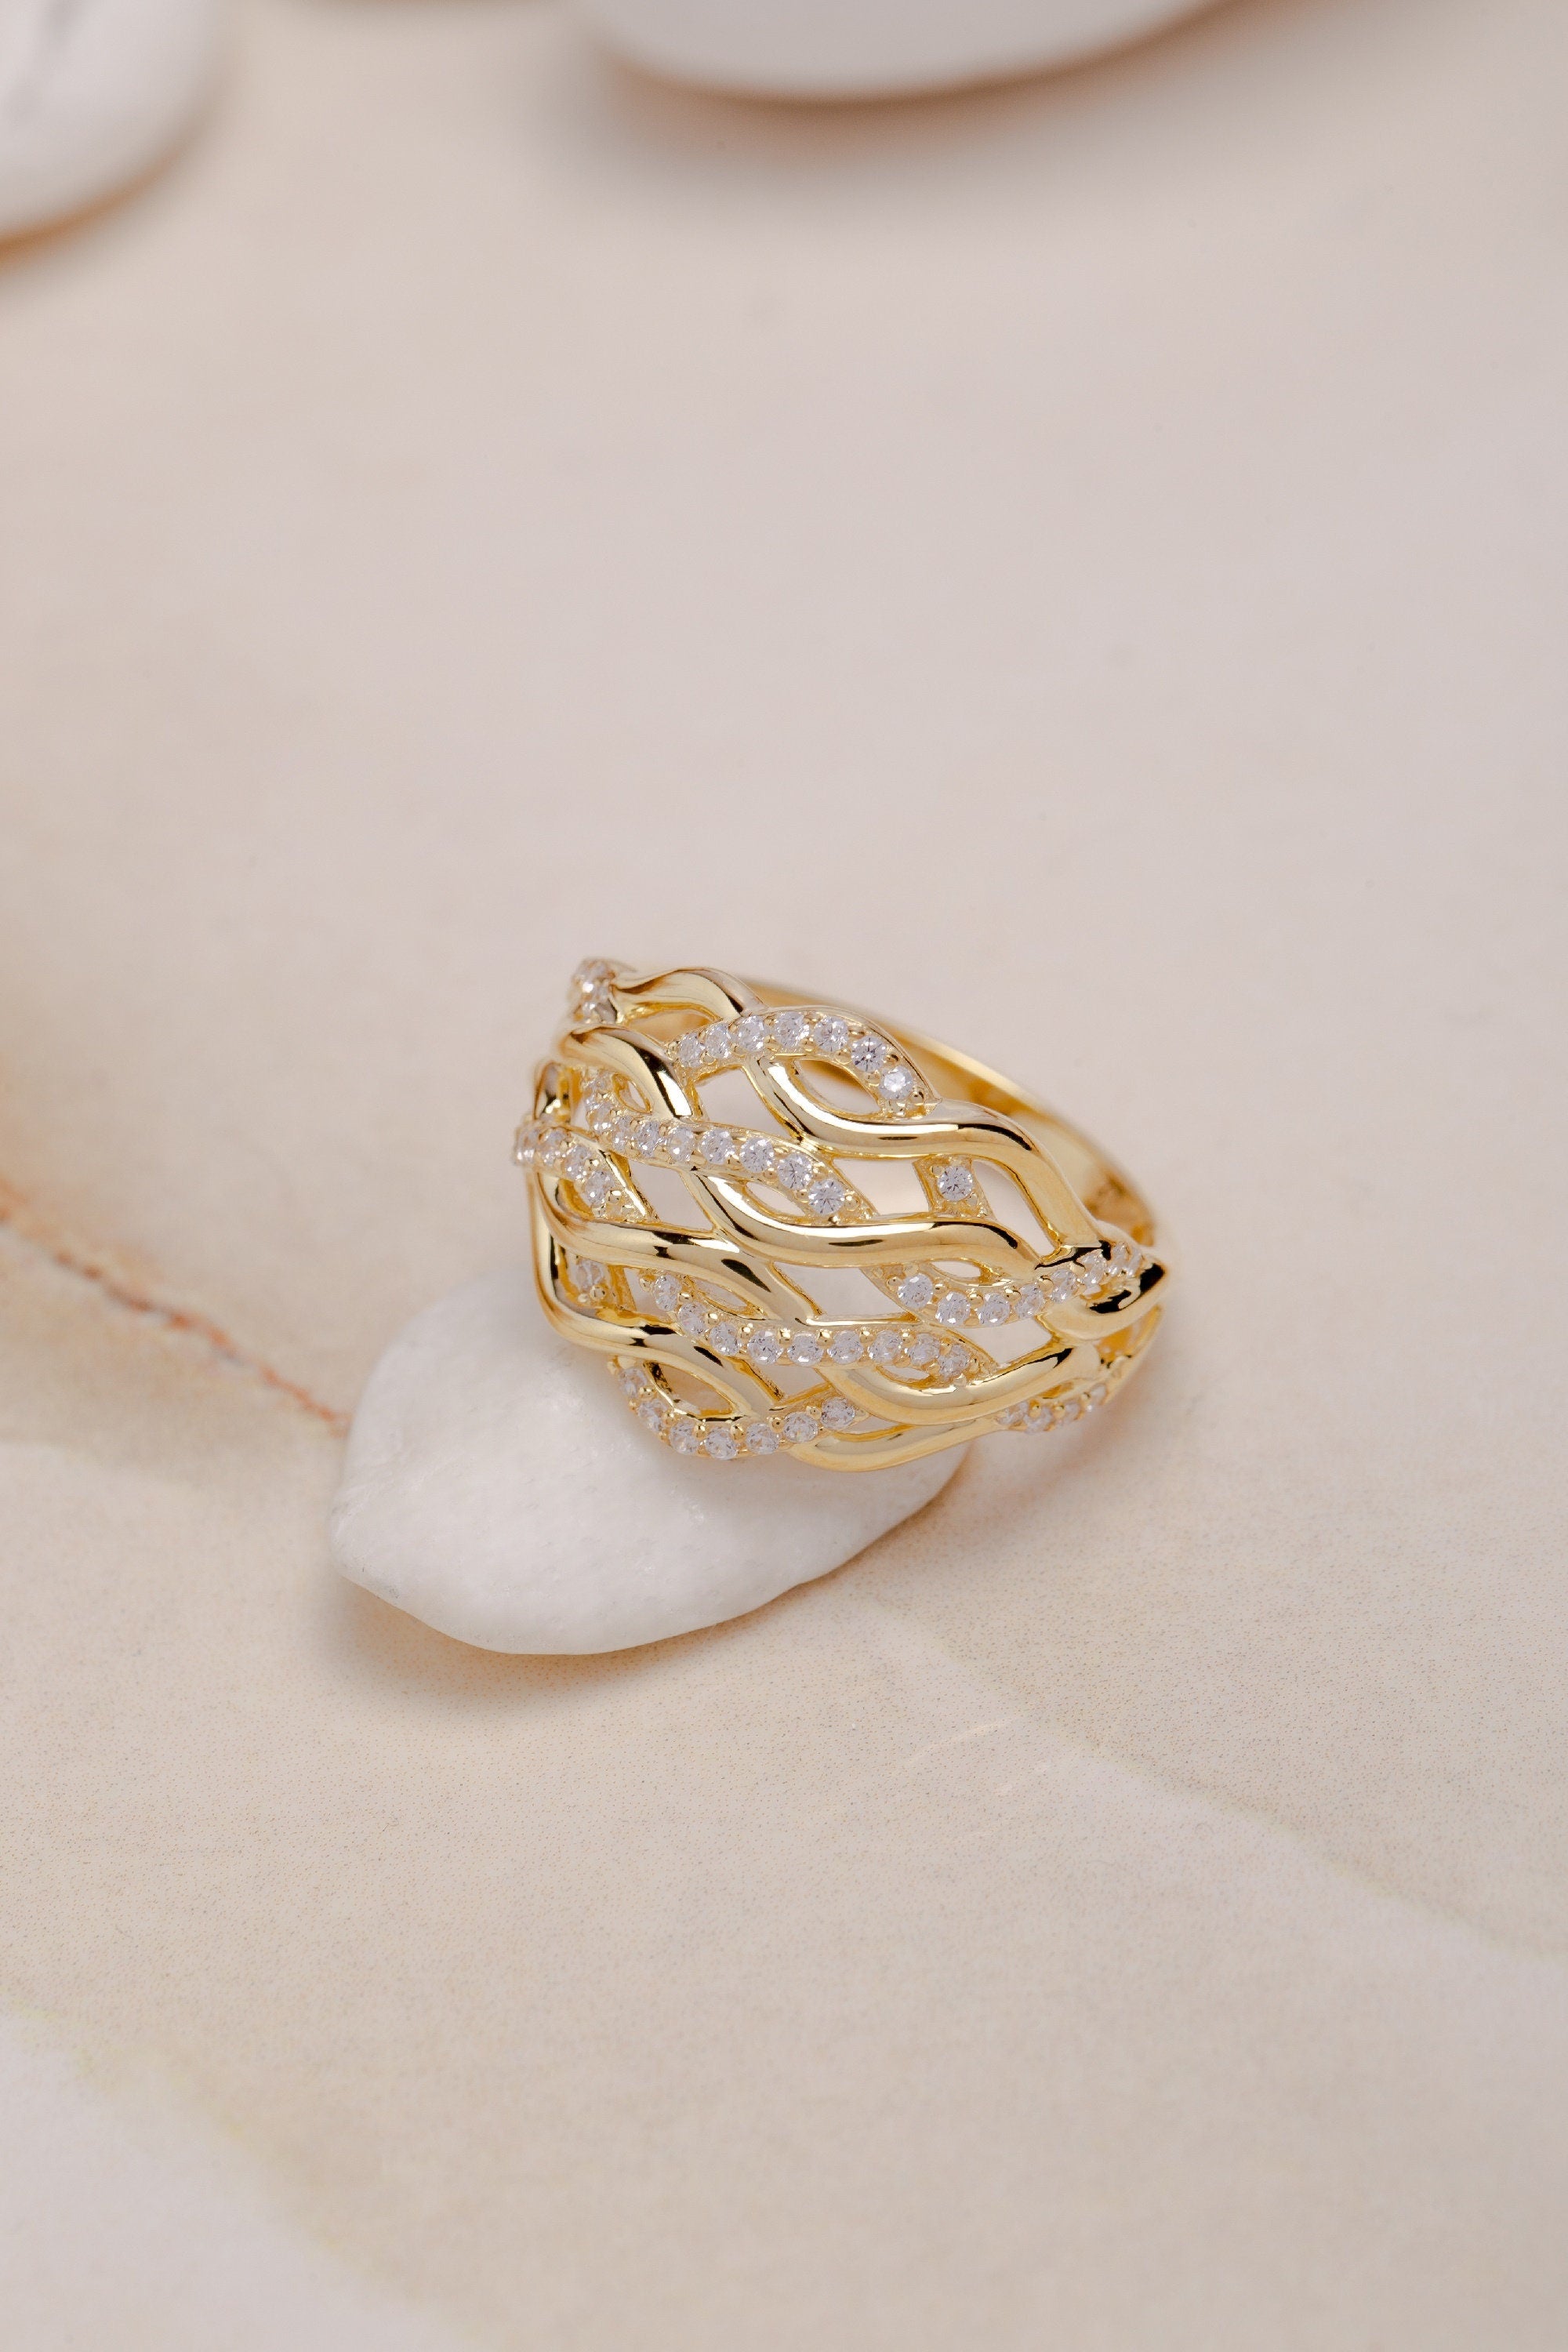 14K Solid Gold Double Braid Ring, 925 Sterling Silver Zircon Gemstone, Knot Ring, Gift For Mother Day, Mother Day Jewelry